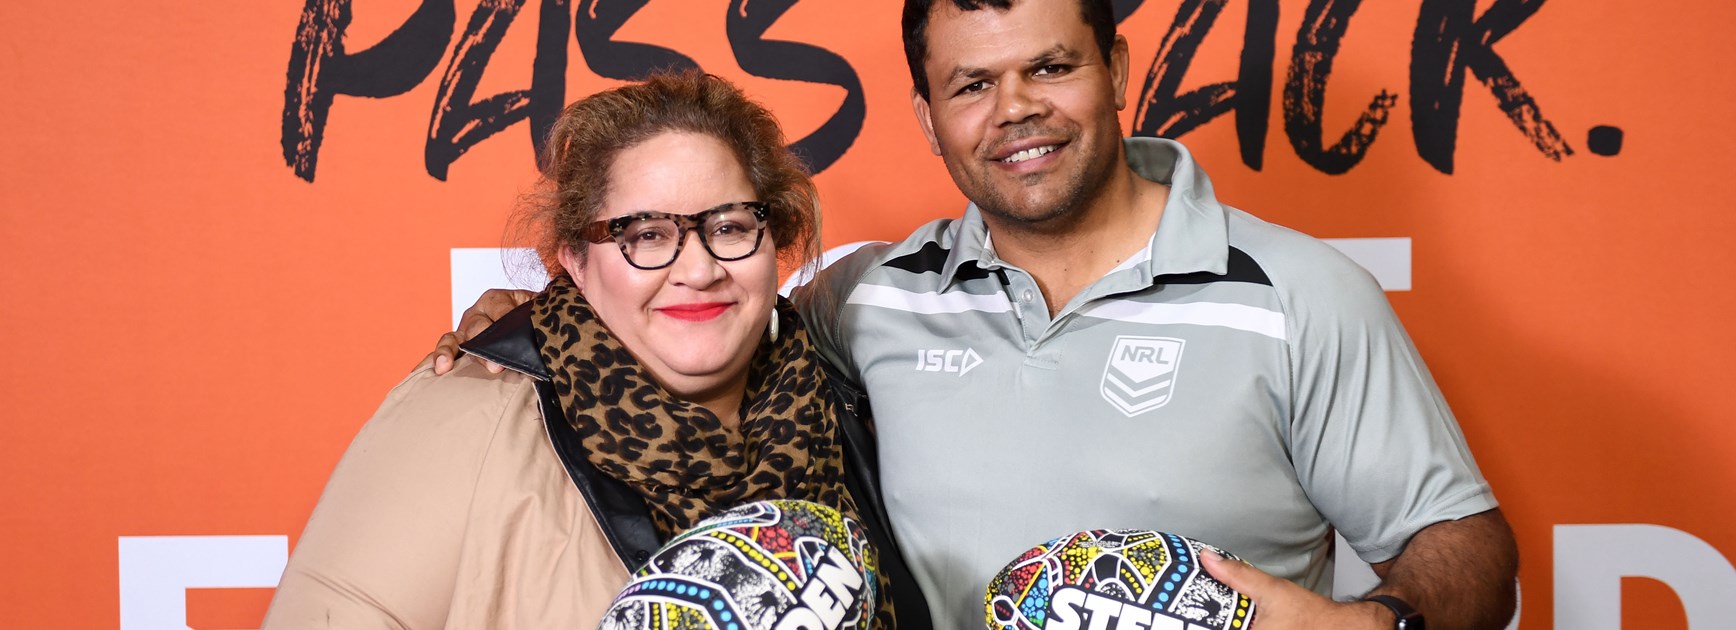 Megan Davis and Dean Widders at the 2020 NRL Indigenous Round launch.